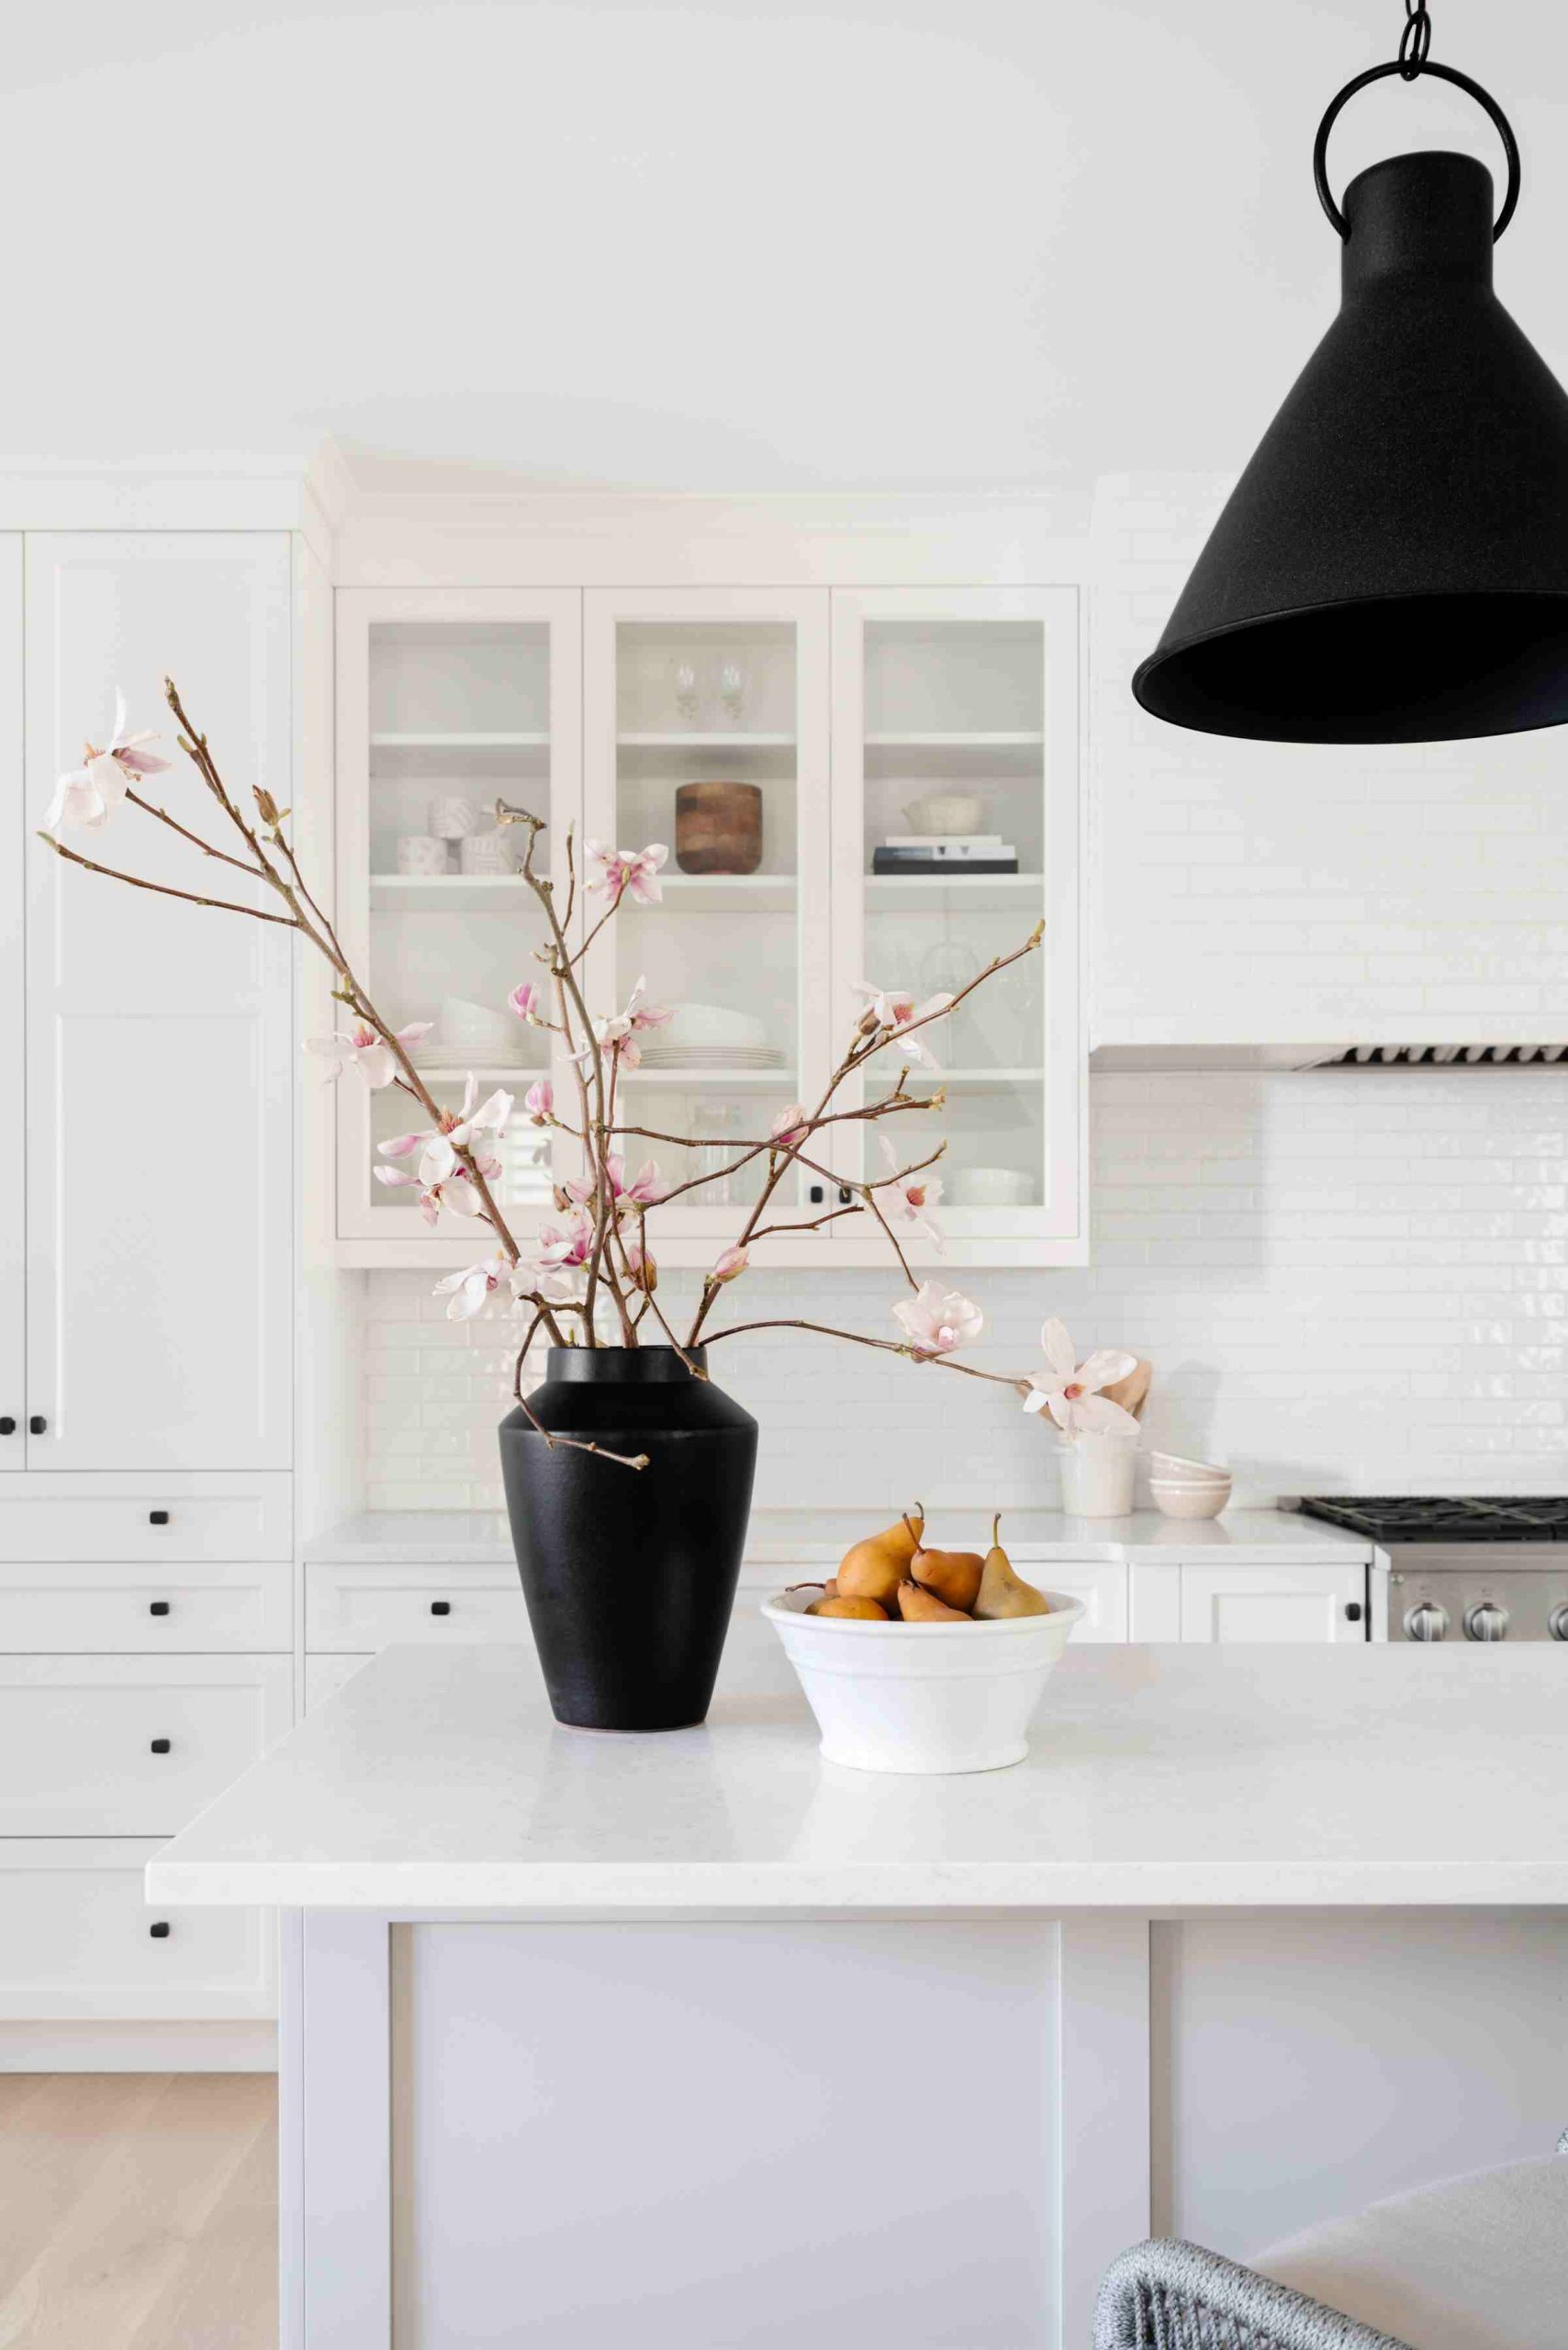 Kitchen Styling - 5 top tips